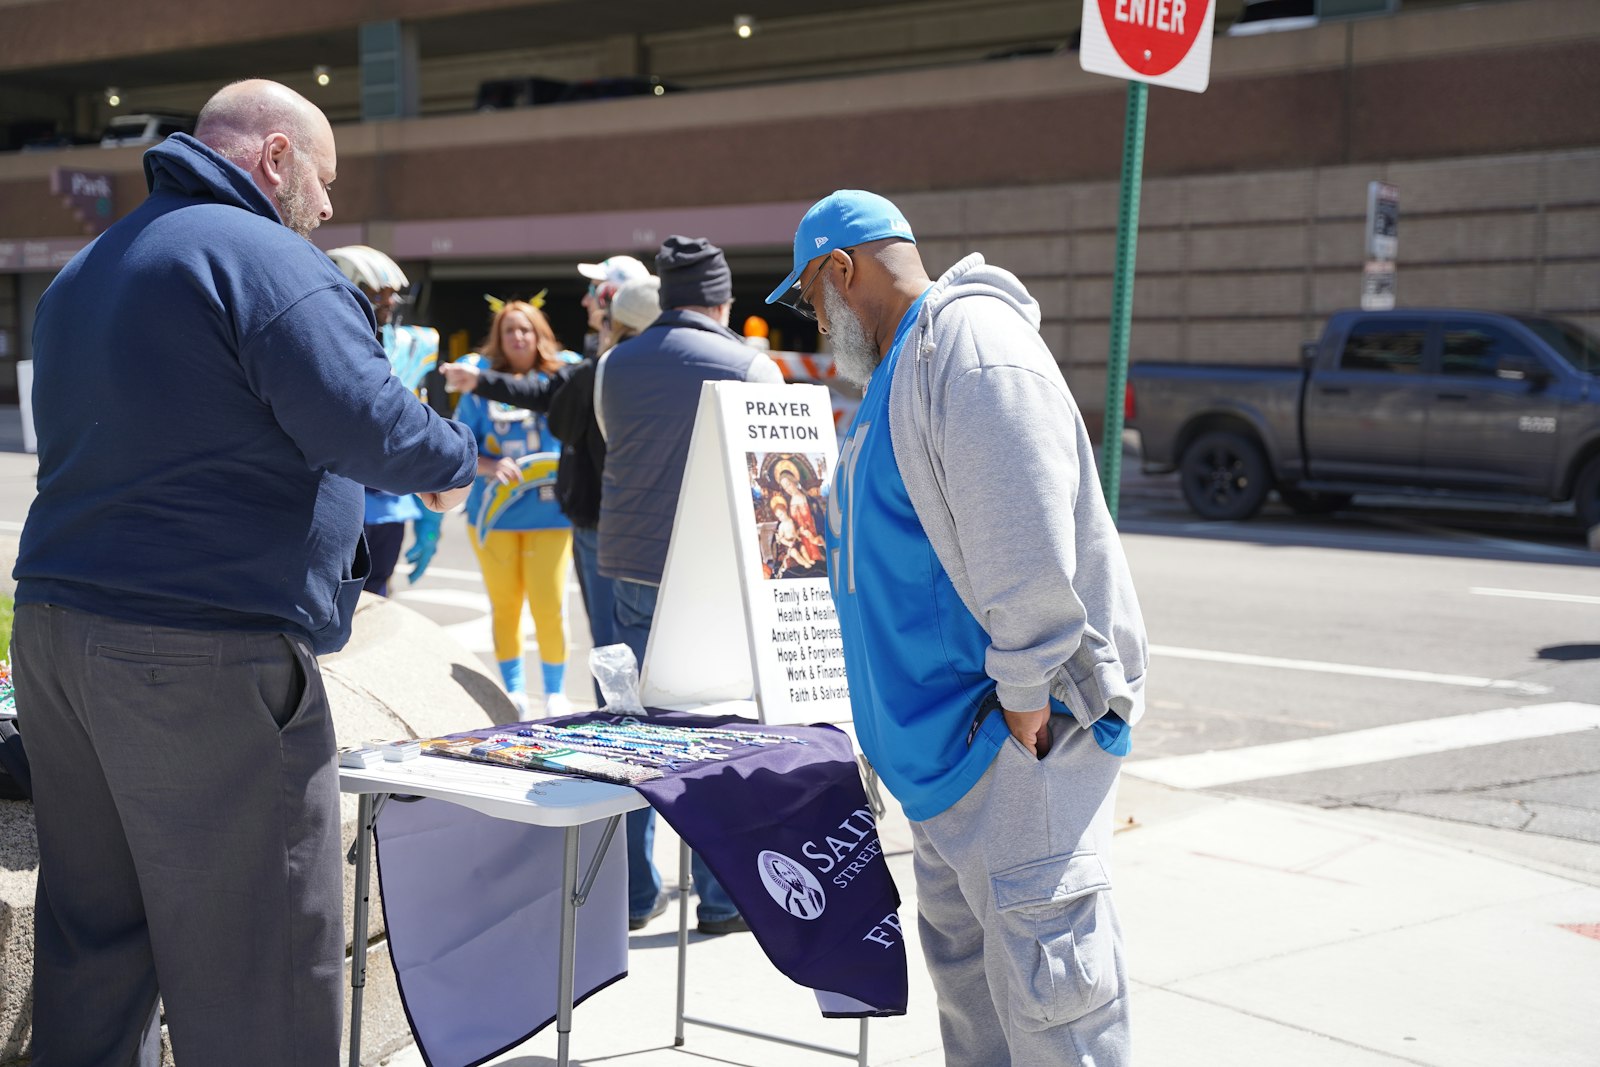 A Detroit Lions fans scouts the St. Paul Street Evangelization table that has rosaries, miraculous medals and prayer cards. Evangelists were on hand to talk about Jesus, Catholicism and make friends with passersby.